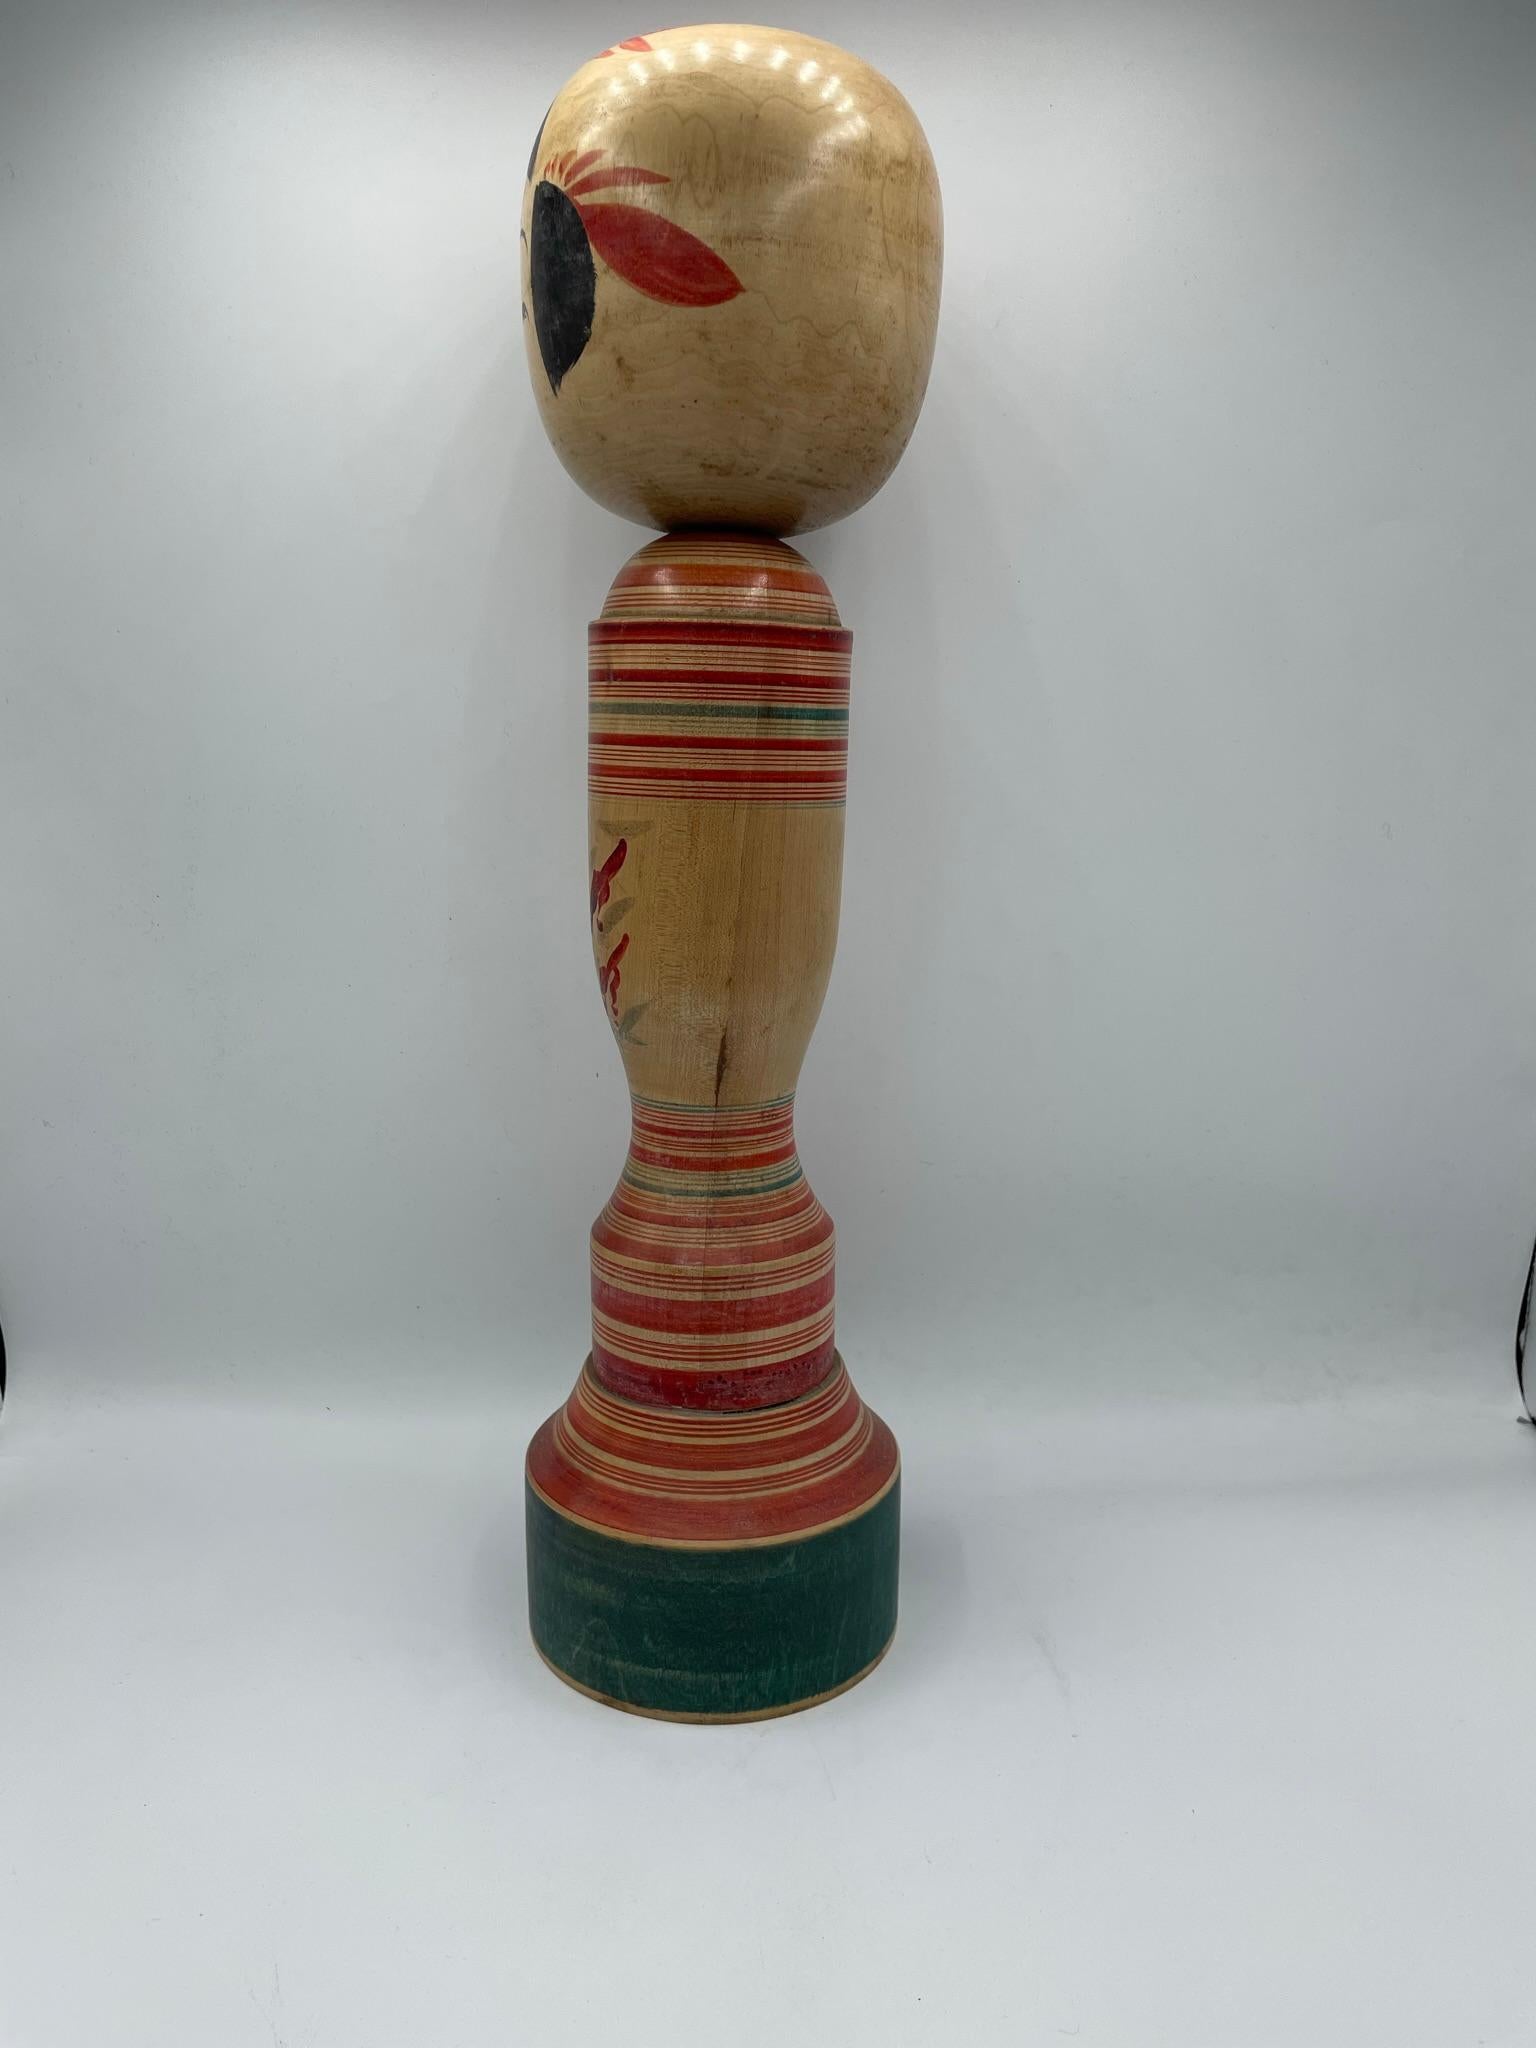 This is a Japanese Kokeshi doll made with wood. It was made around 1970s in showa era.
These wooden dolls from Tohoku region (northern Japan) are composed of a round or cylindrical head and a cylindrical body, without arms. They are hand painted